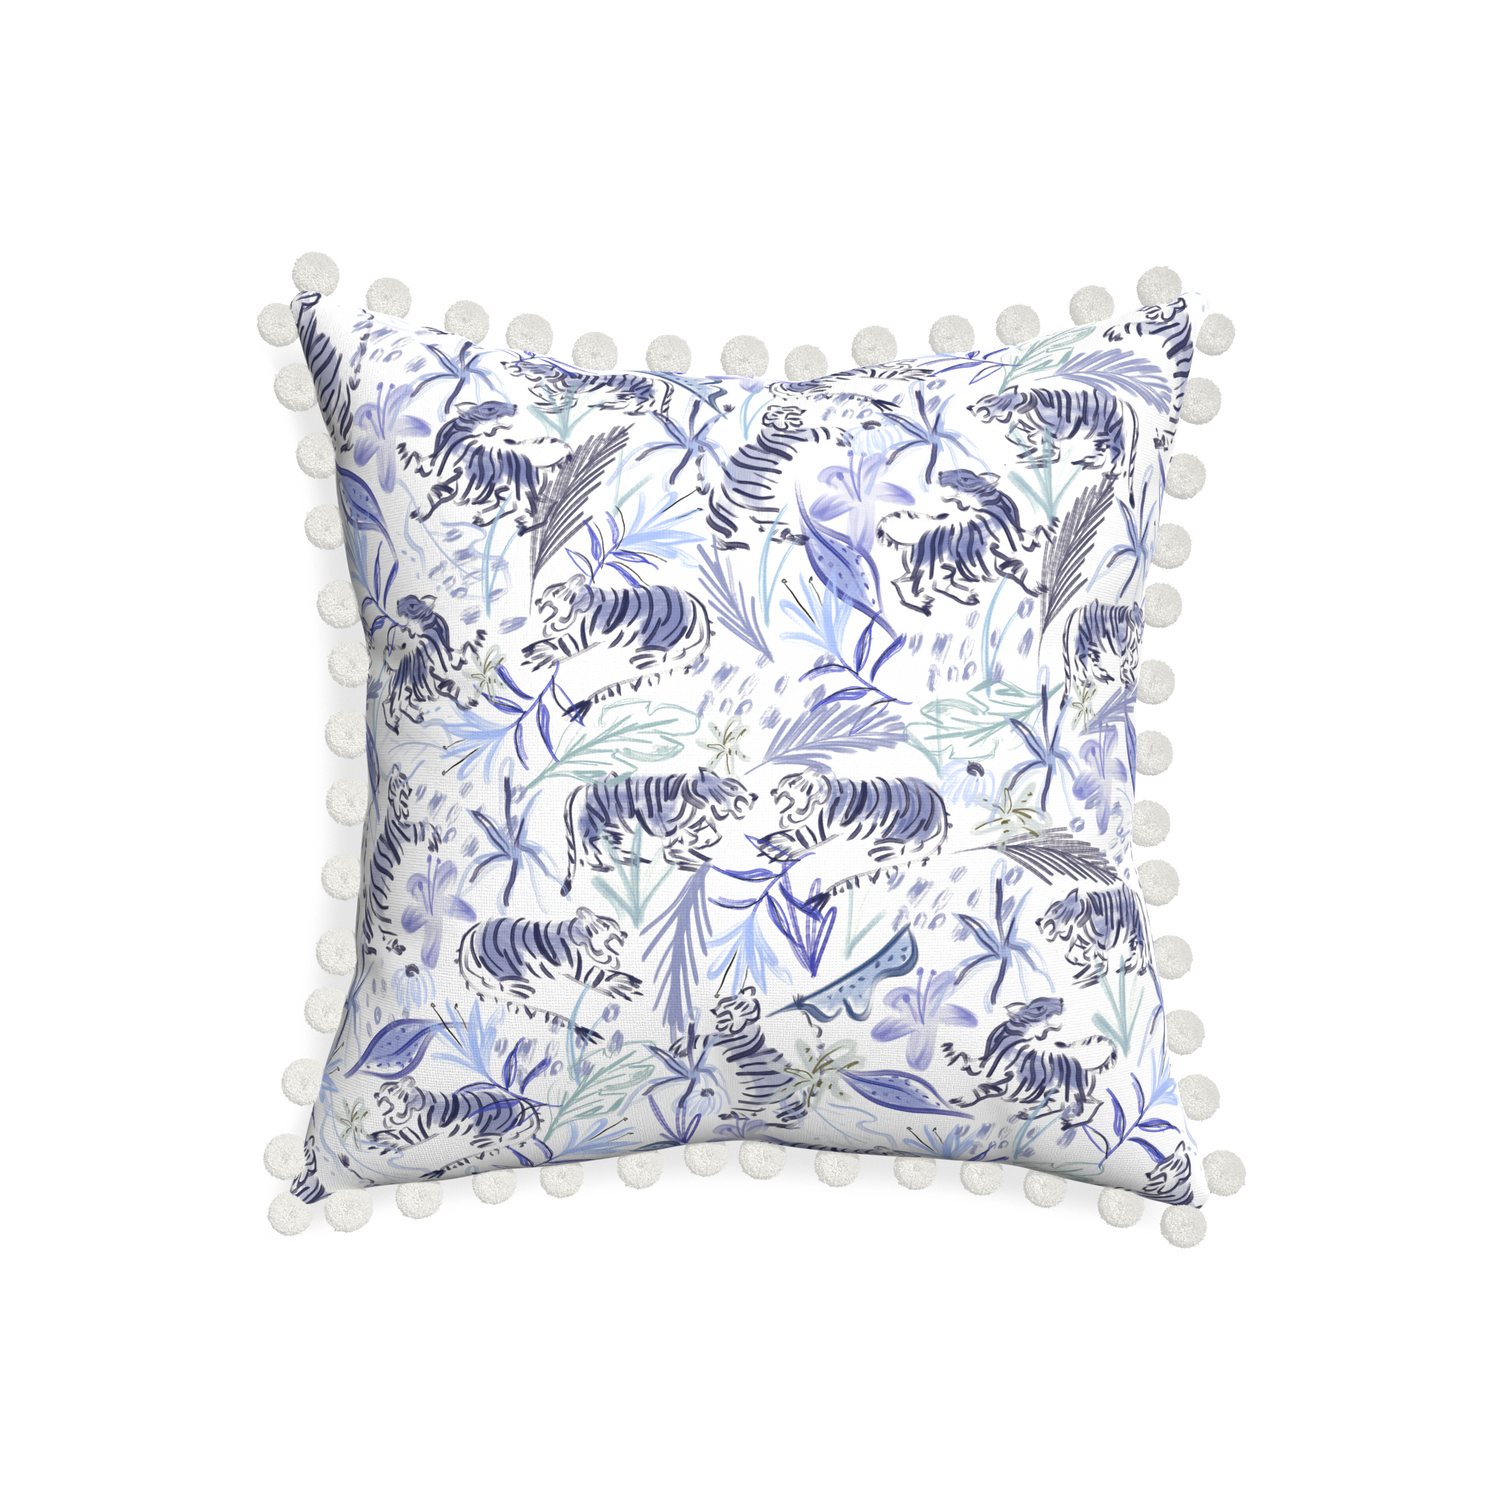 20-square frida blue custom blue with intricate tiger designpillow with snow pom pom on white background